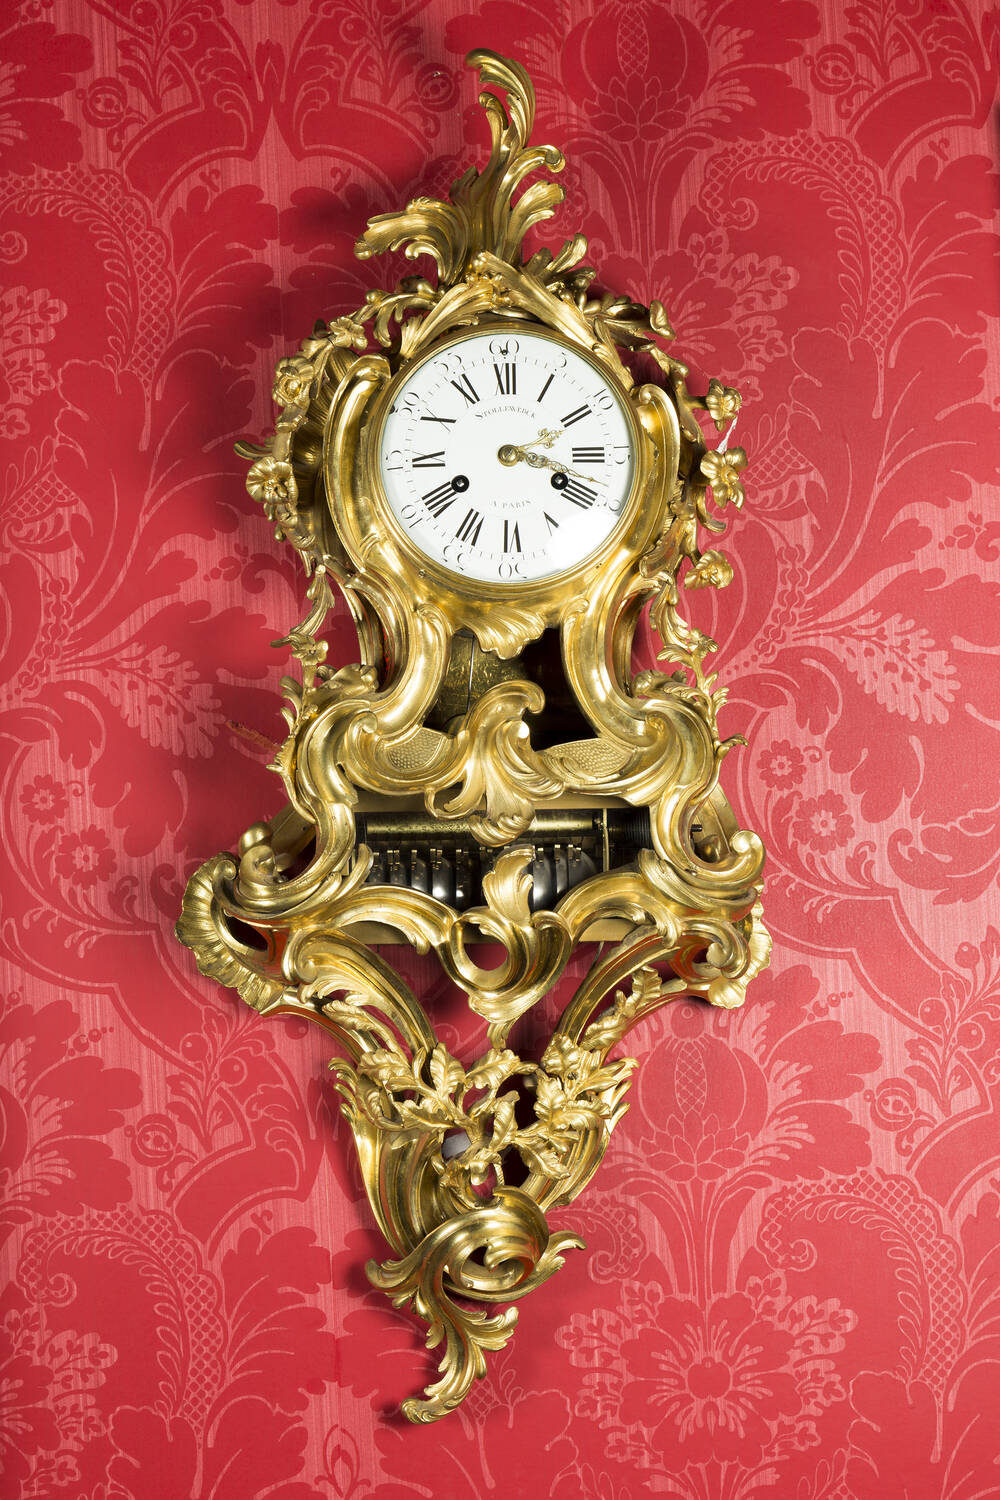 A very ornate golden cartel clock, hanging on a wall covered with red paper.